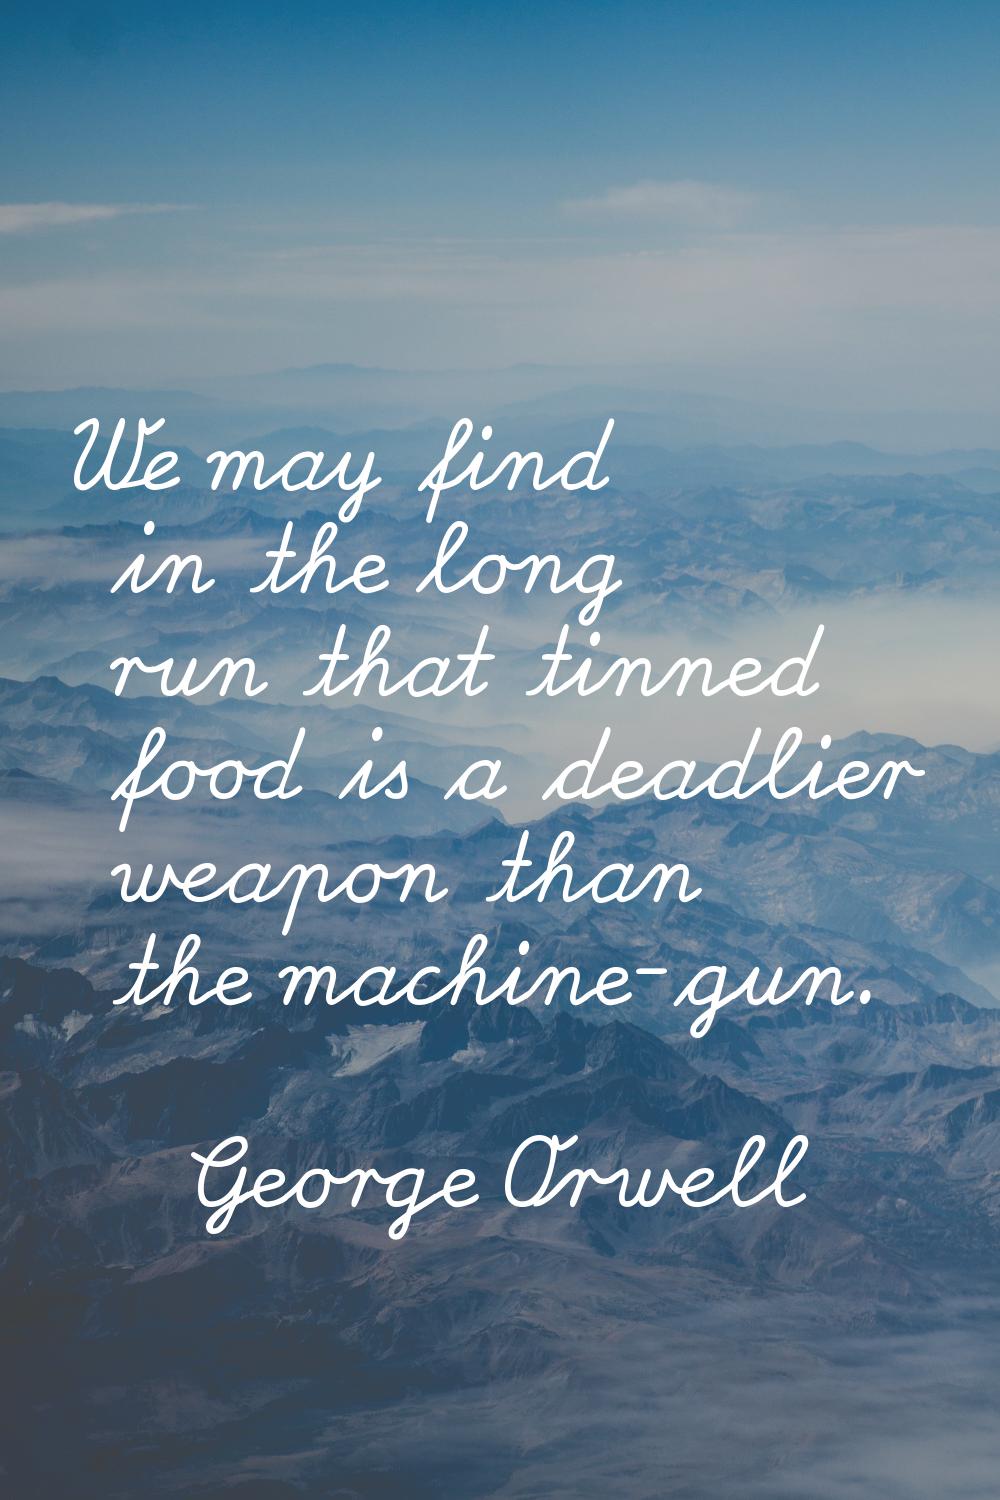 We may find in the long run that tinned food is a deadlier weapon than the machine-gun.